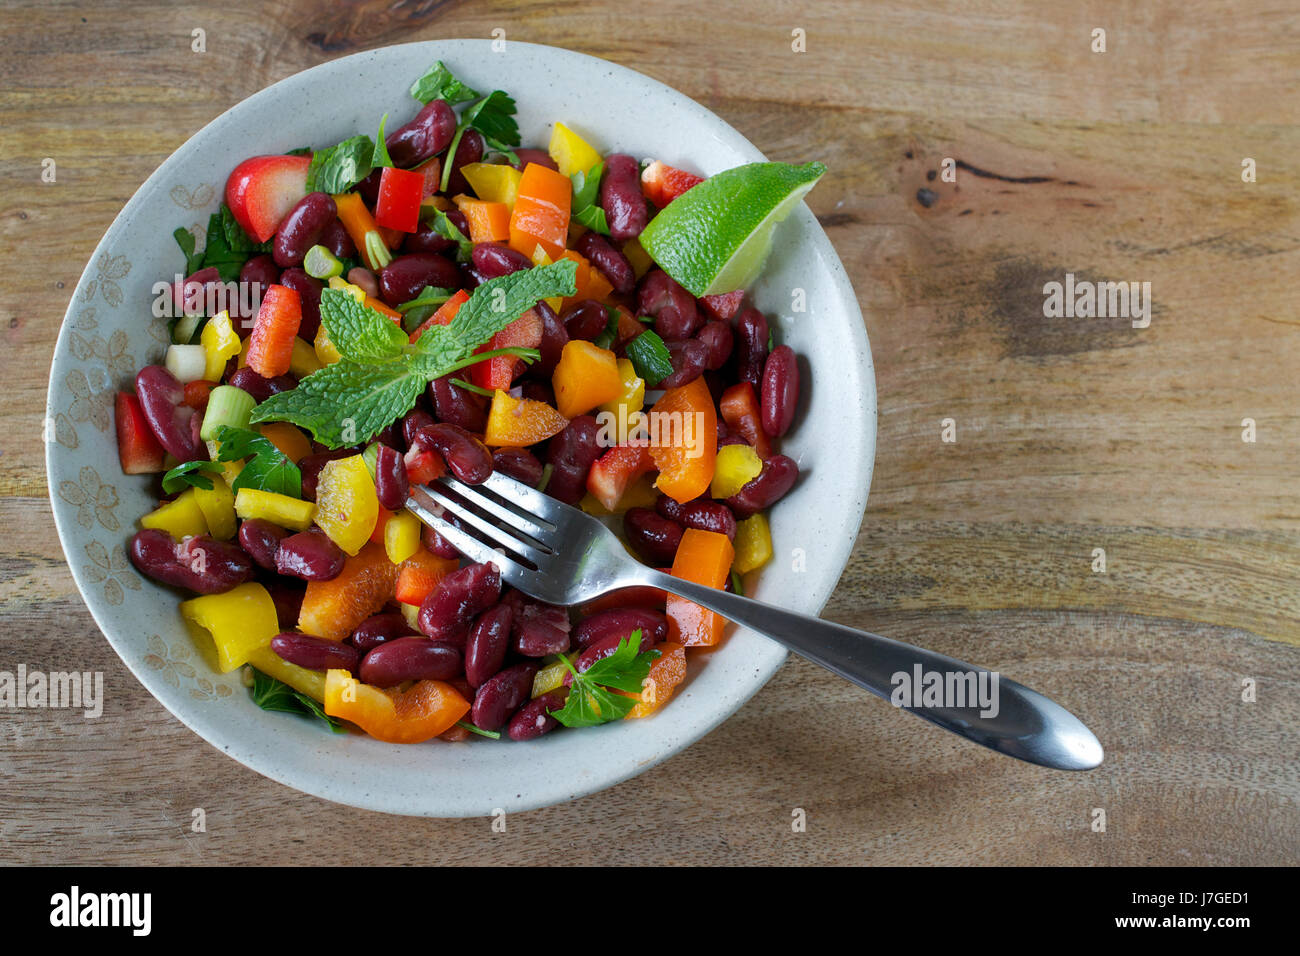 Closeup on red kidney beans and bell pepper salad served on tan plate on wooden table, decorated with mint leaves and served with a slice of lime Stock Photo